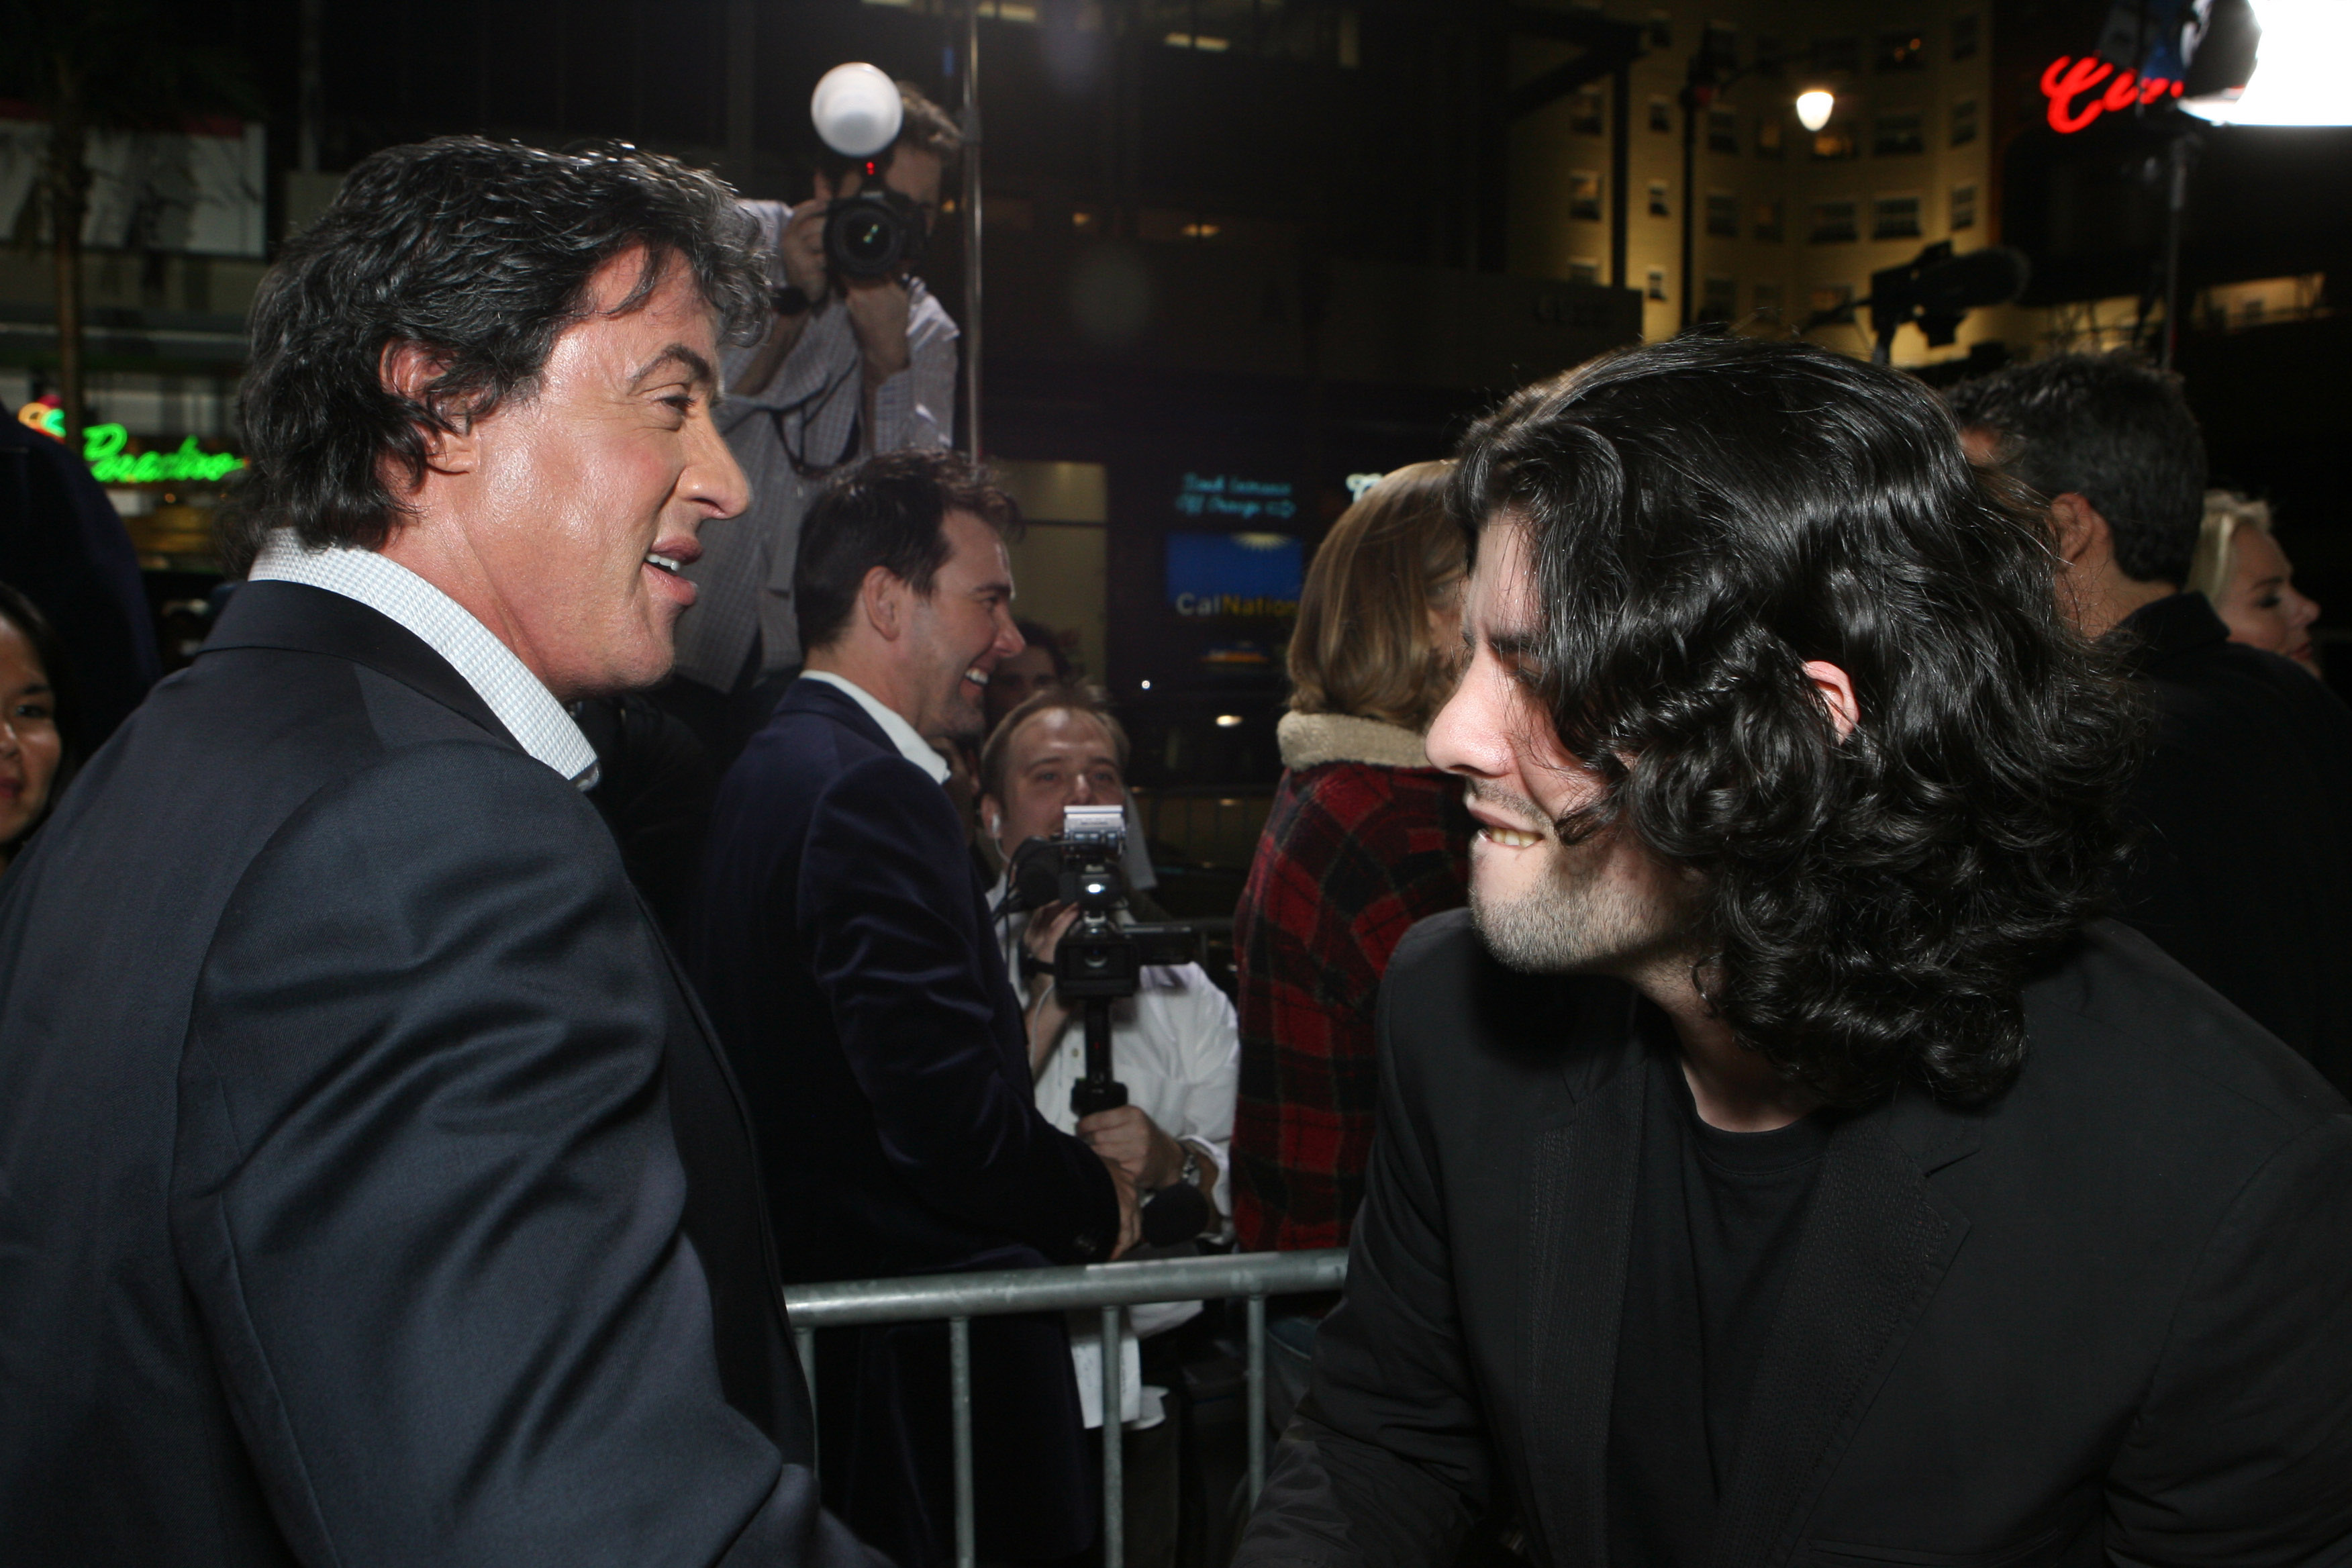 Sylvester and Sage Stallone during the world premiere of "Rocky Balboa" in Hollywood, California, on December 13, 2006 | Source: Getty Images